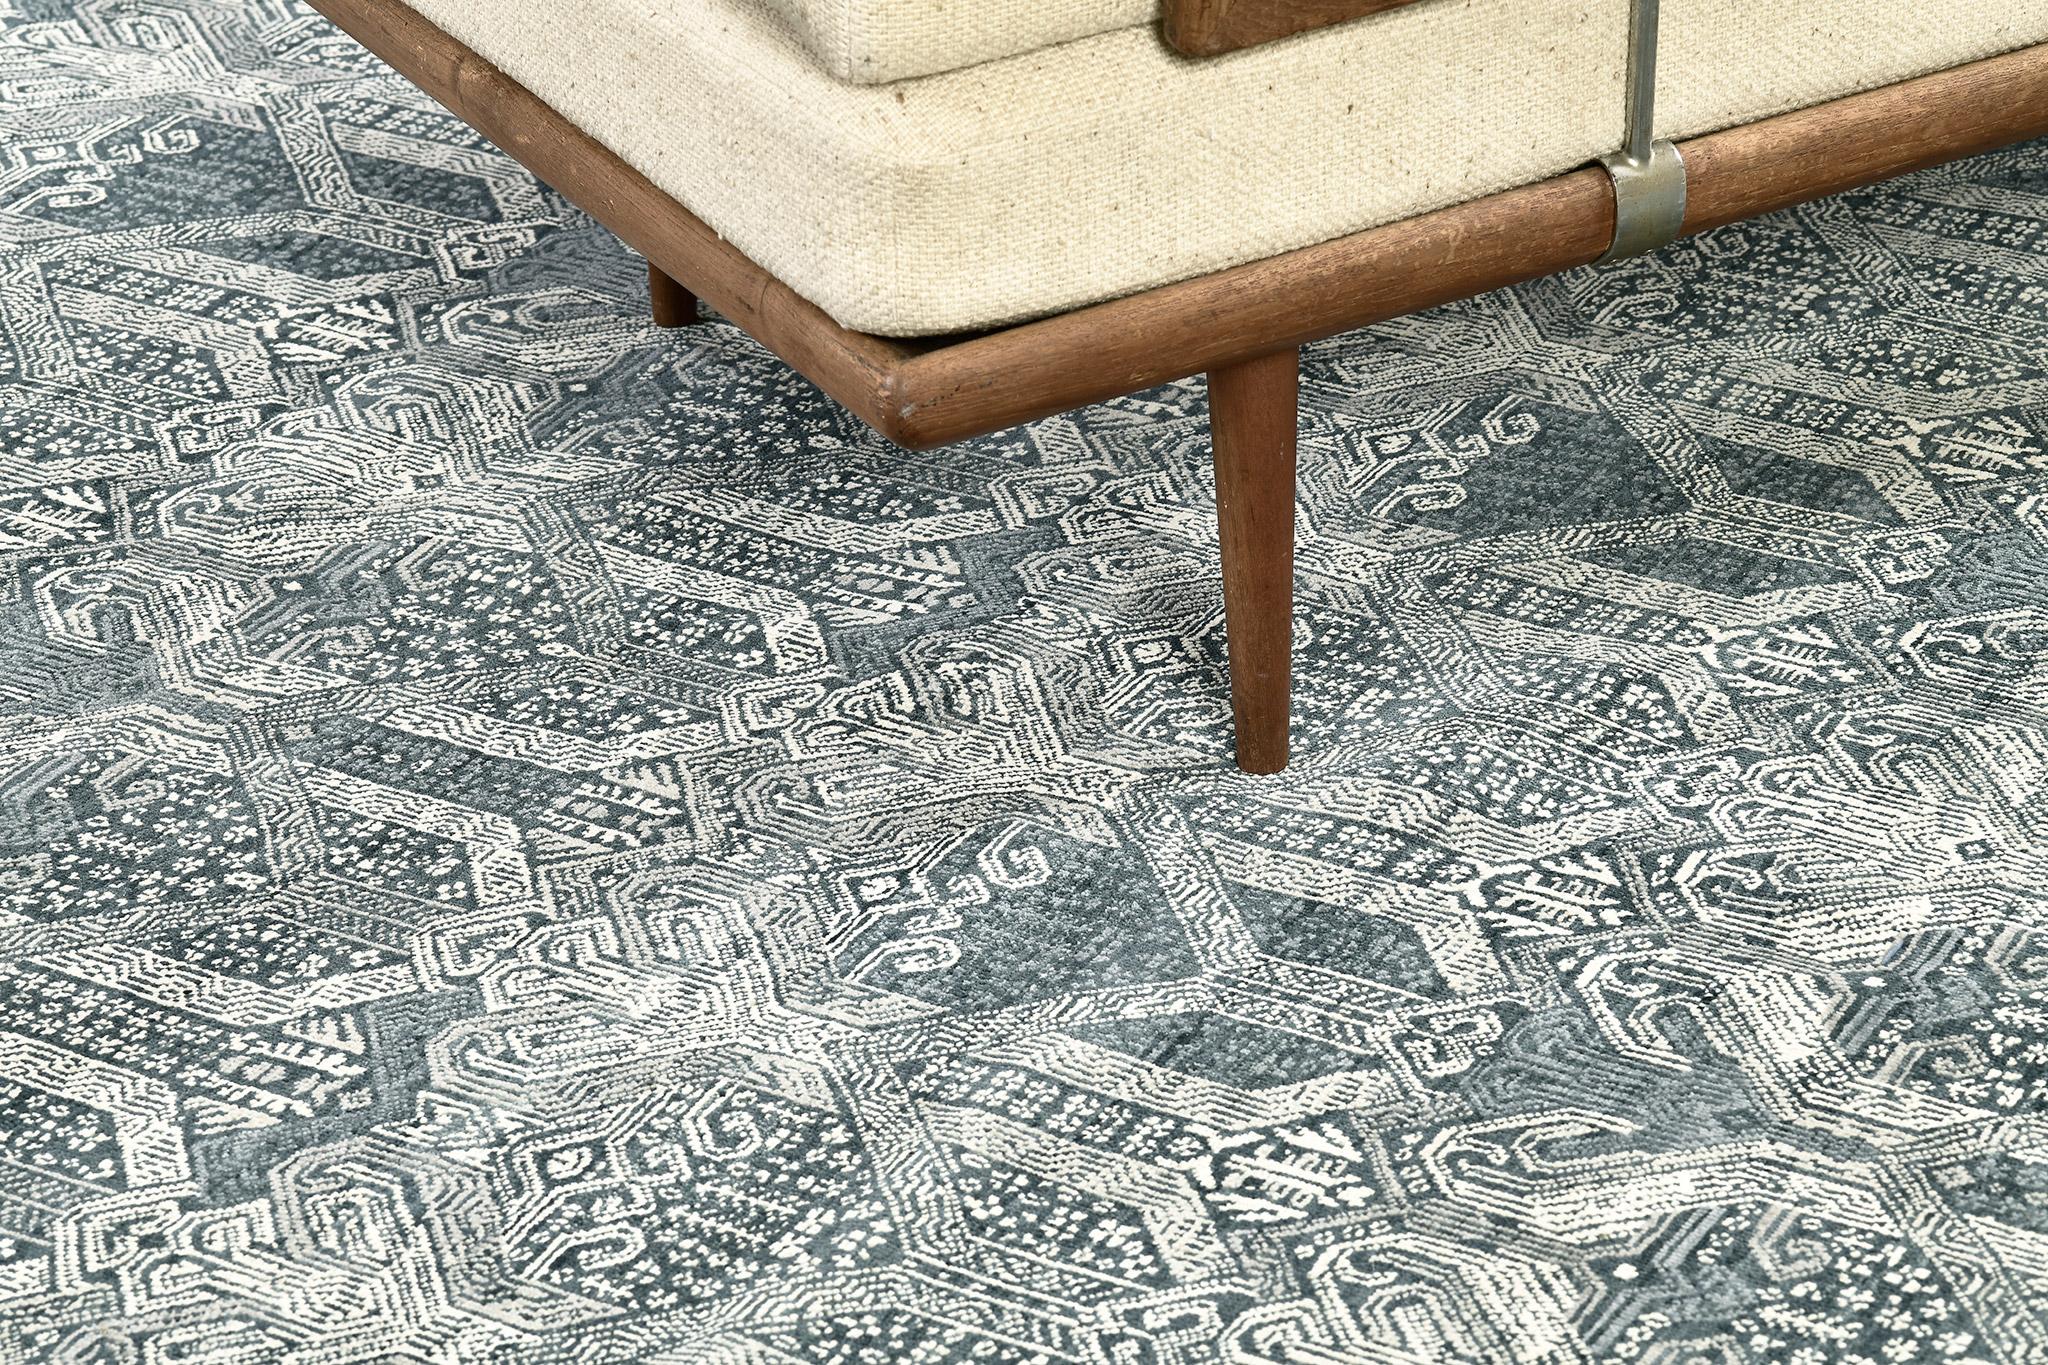 A wonderful transitional design rug that features the variegated deep tones of prussian blue. Allover patterns of Indian inspired elements, creates a magnificent combination for this work of art. Simply put, this remarkable creation has an